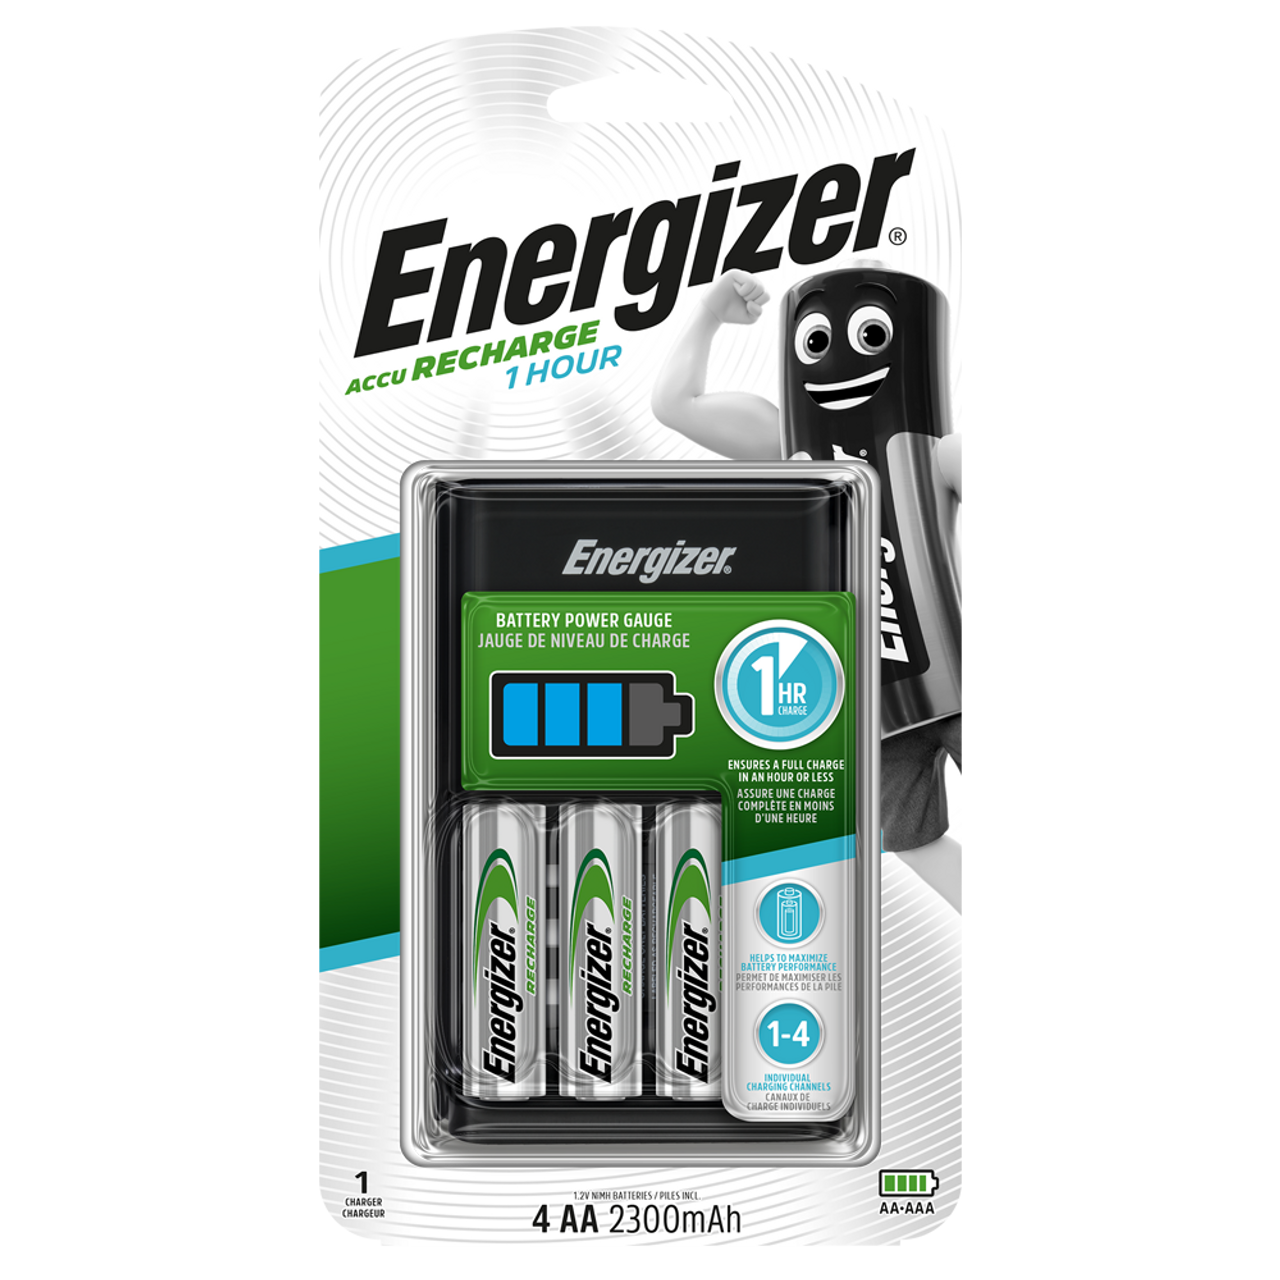 Energizer 1 Hr Battery Charger with 4 x 2300mAh AA Batteries